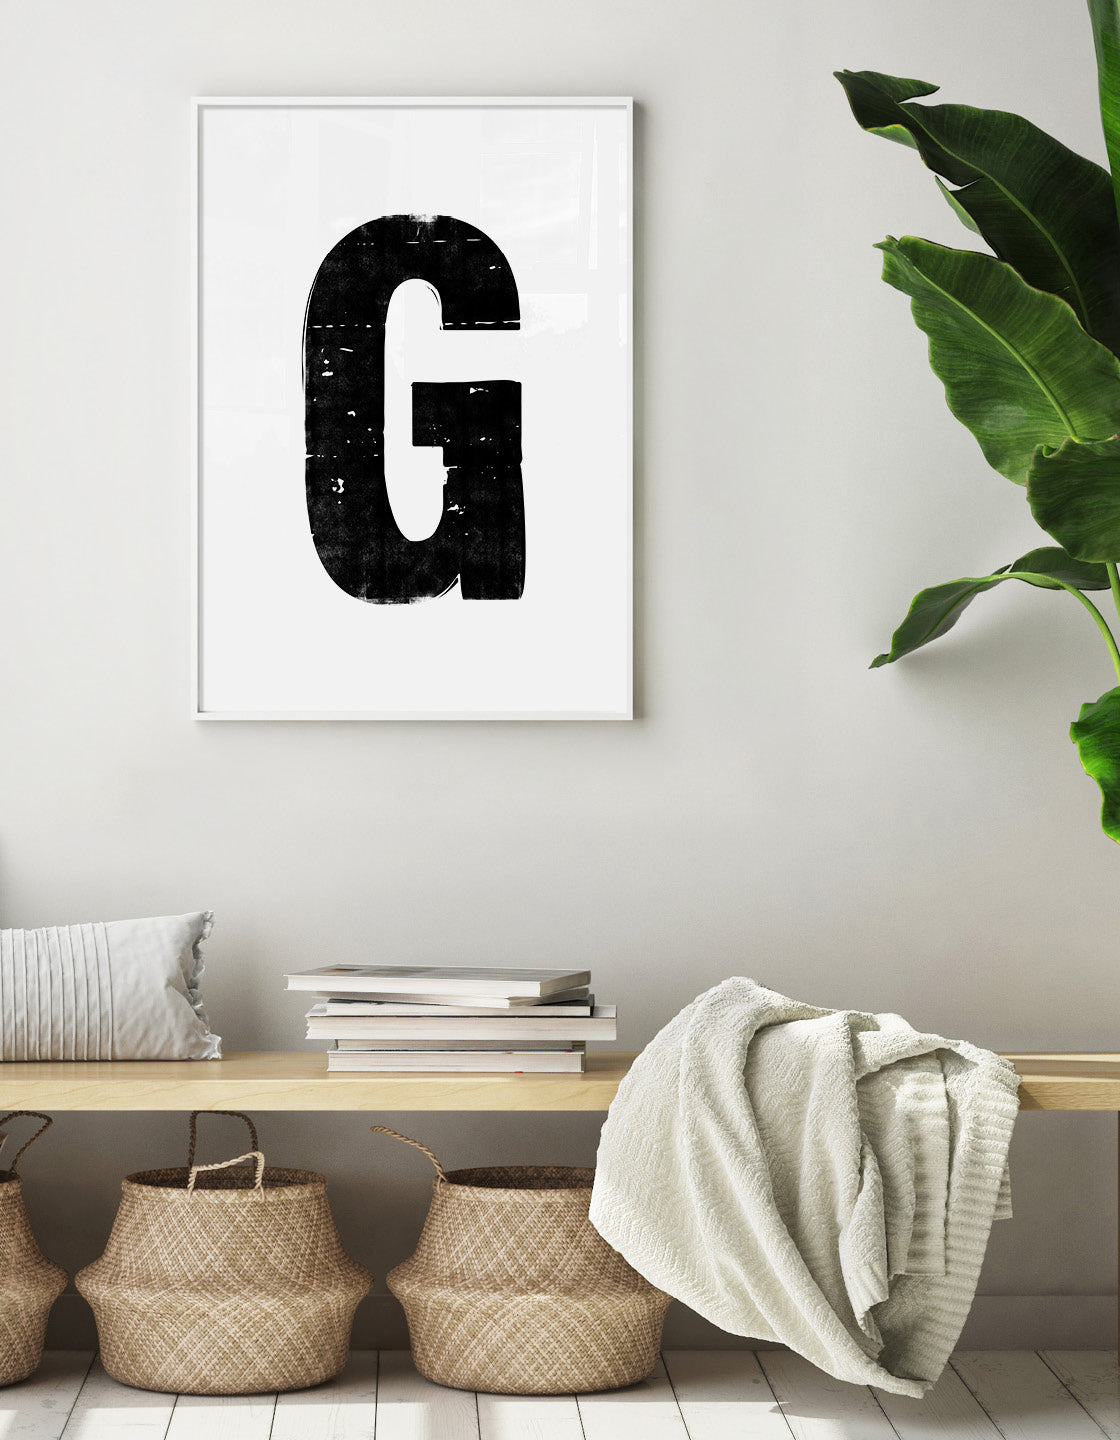 lifestyle image showing the letter G monochrome alphabet print on the wall above a bench seat with a pile of books and woven baskets underneath